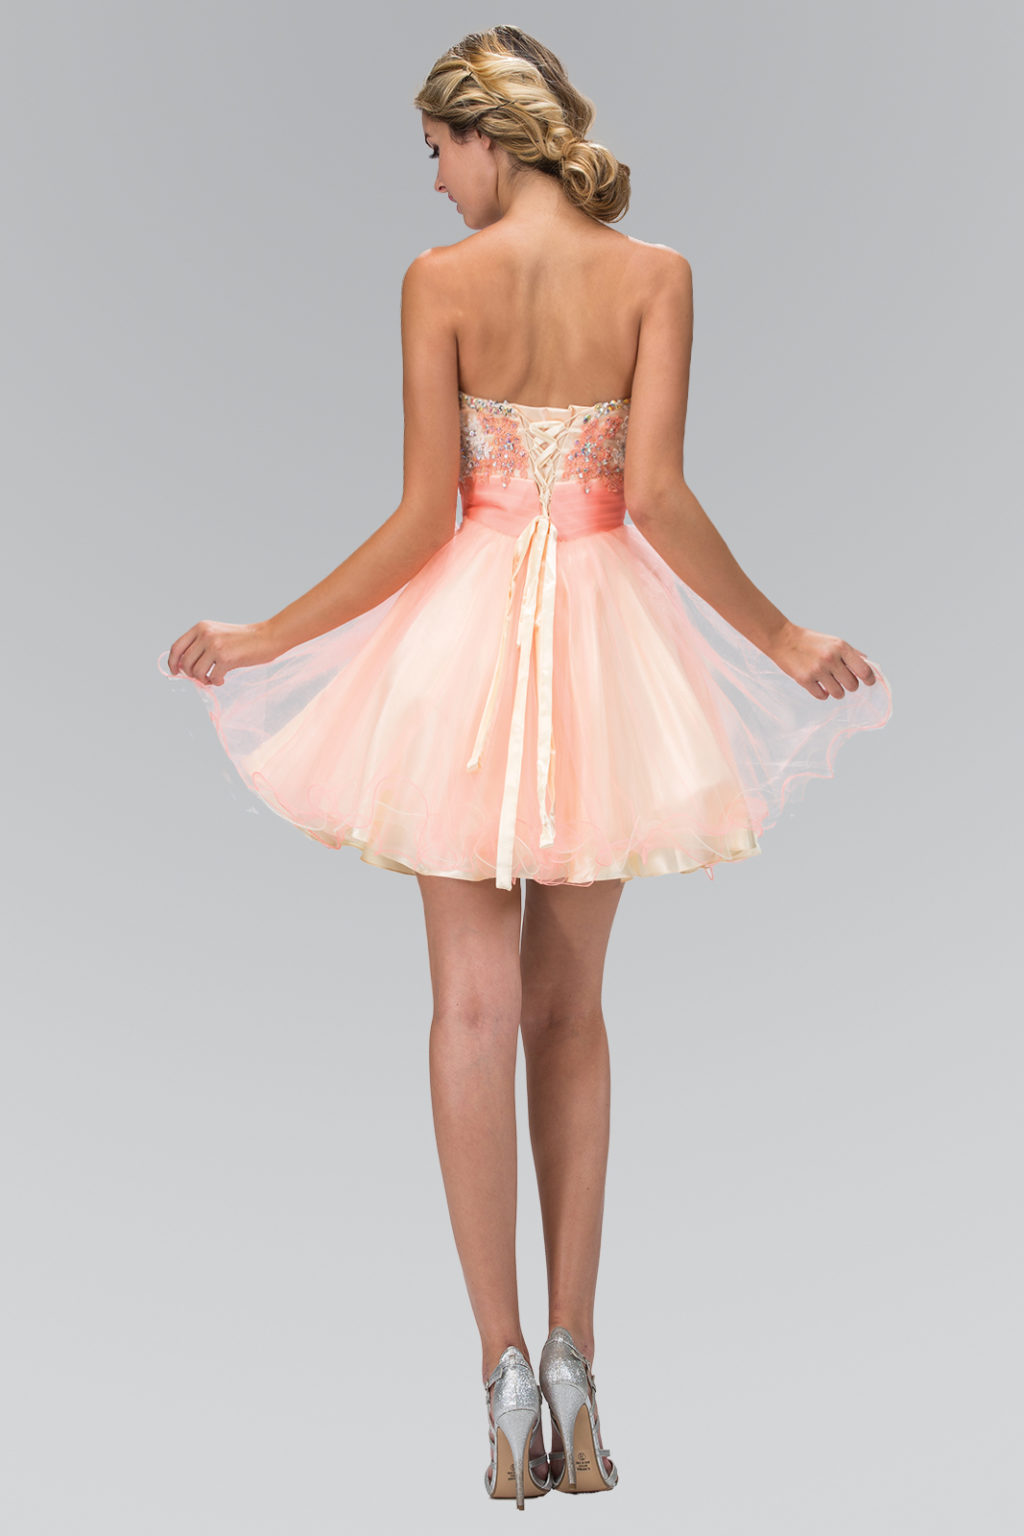 GS2131 Tulle Short Dress with Lace Bodice | GLS Collective